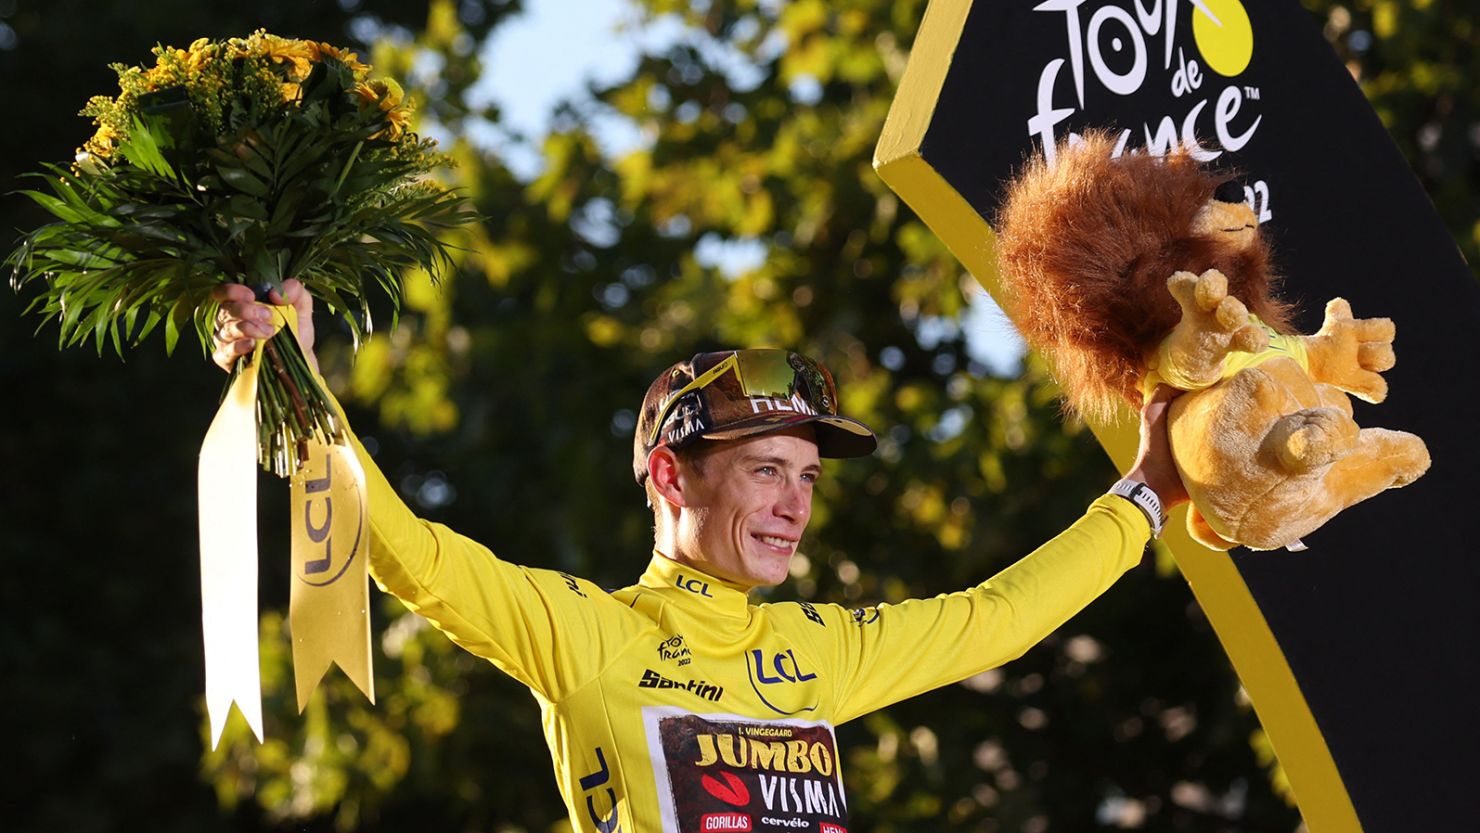 Jumbo-Visma team's Danish rider Jonas Vingegaard celebrates on the podium with the overall leader's yellow jersey after winning the 109th edition of the Tour de France cycling race, after the 21st and final 115,6 km stage between La Defense Arena in Nanterre, outside Paris, and the Champs-Elysees in Paris, France, on July 24, 2022.